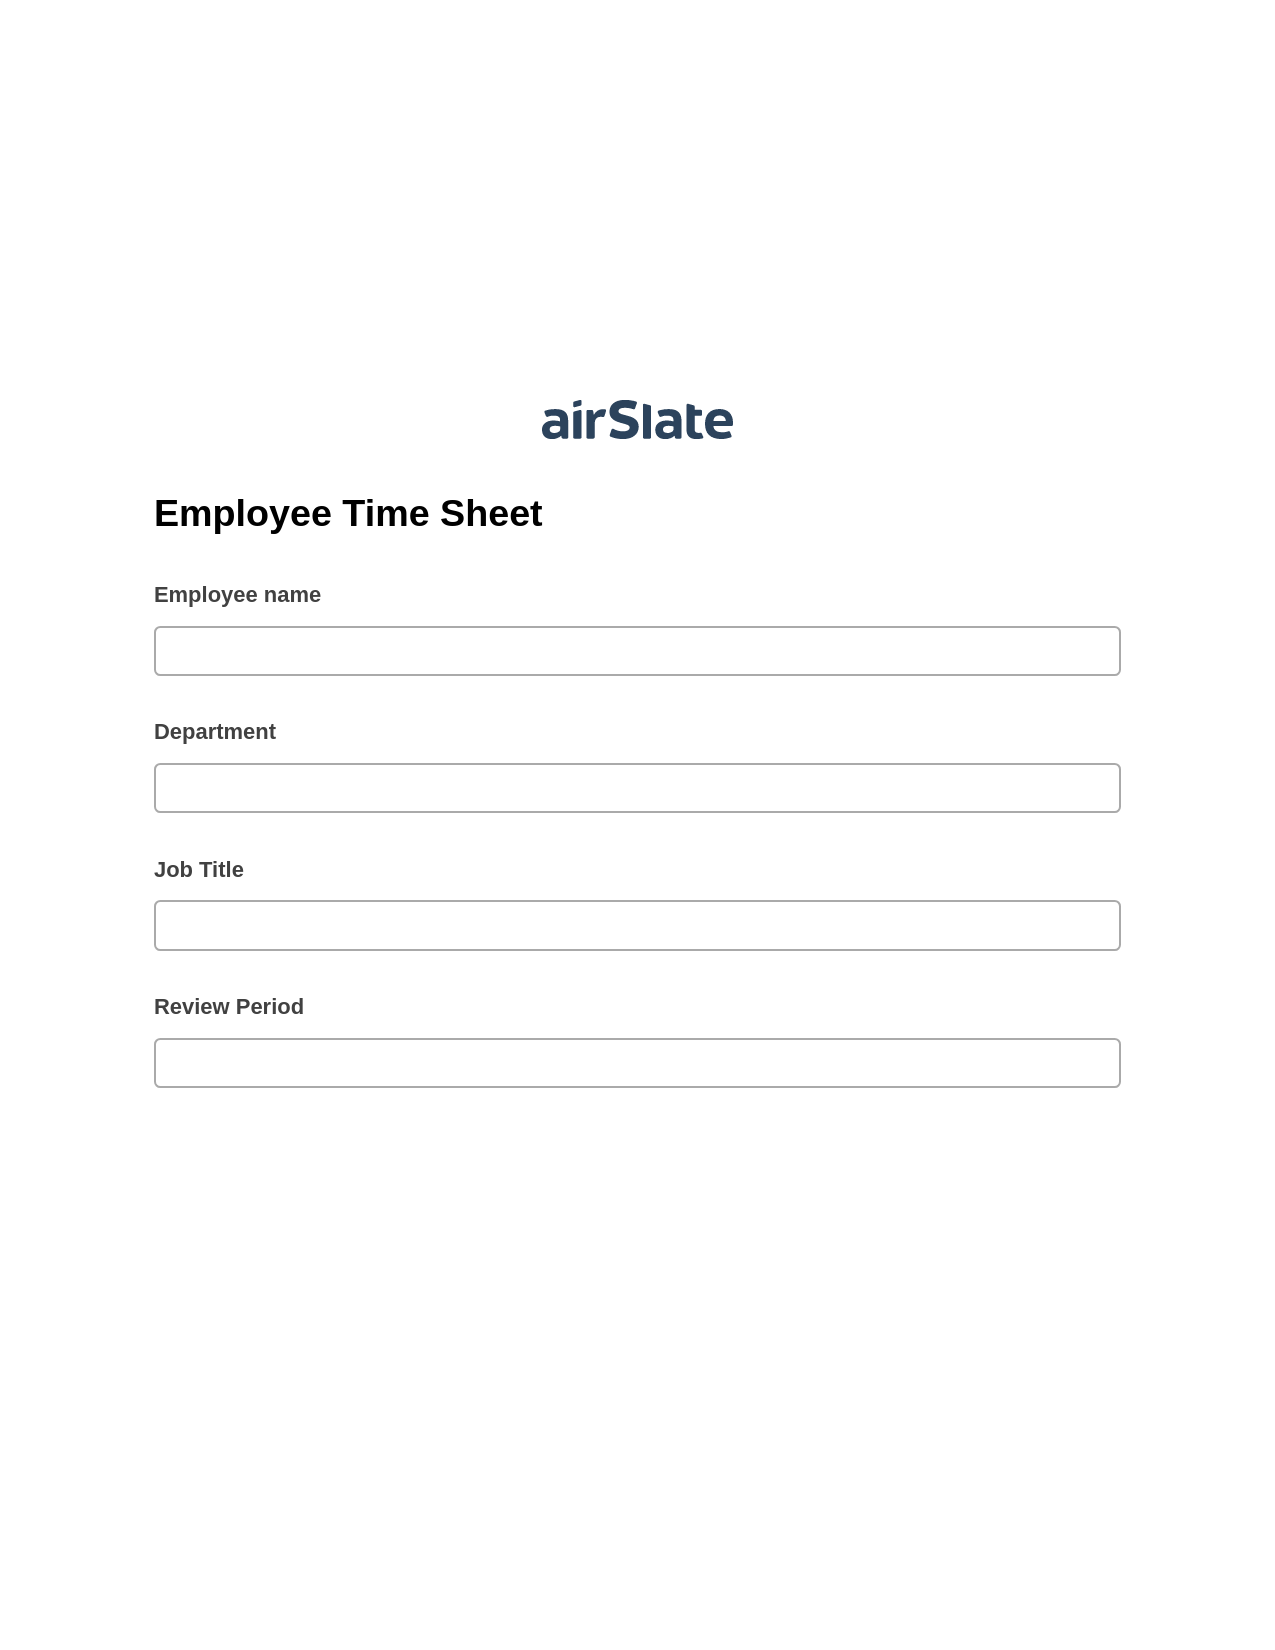 Multirole Employee Time Sheet Pre-fill from CSV File Bot, Create Slate Reminder Bot, Archive to Google Drive Bot